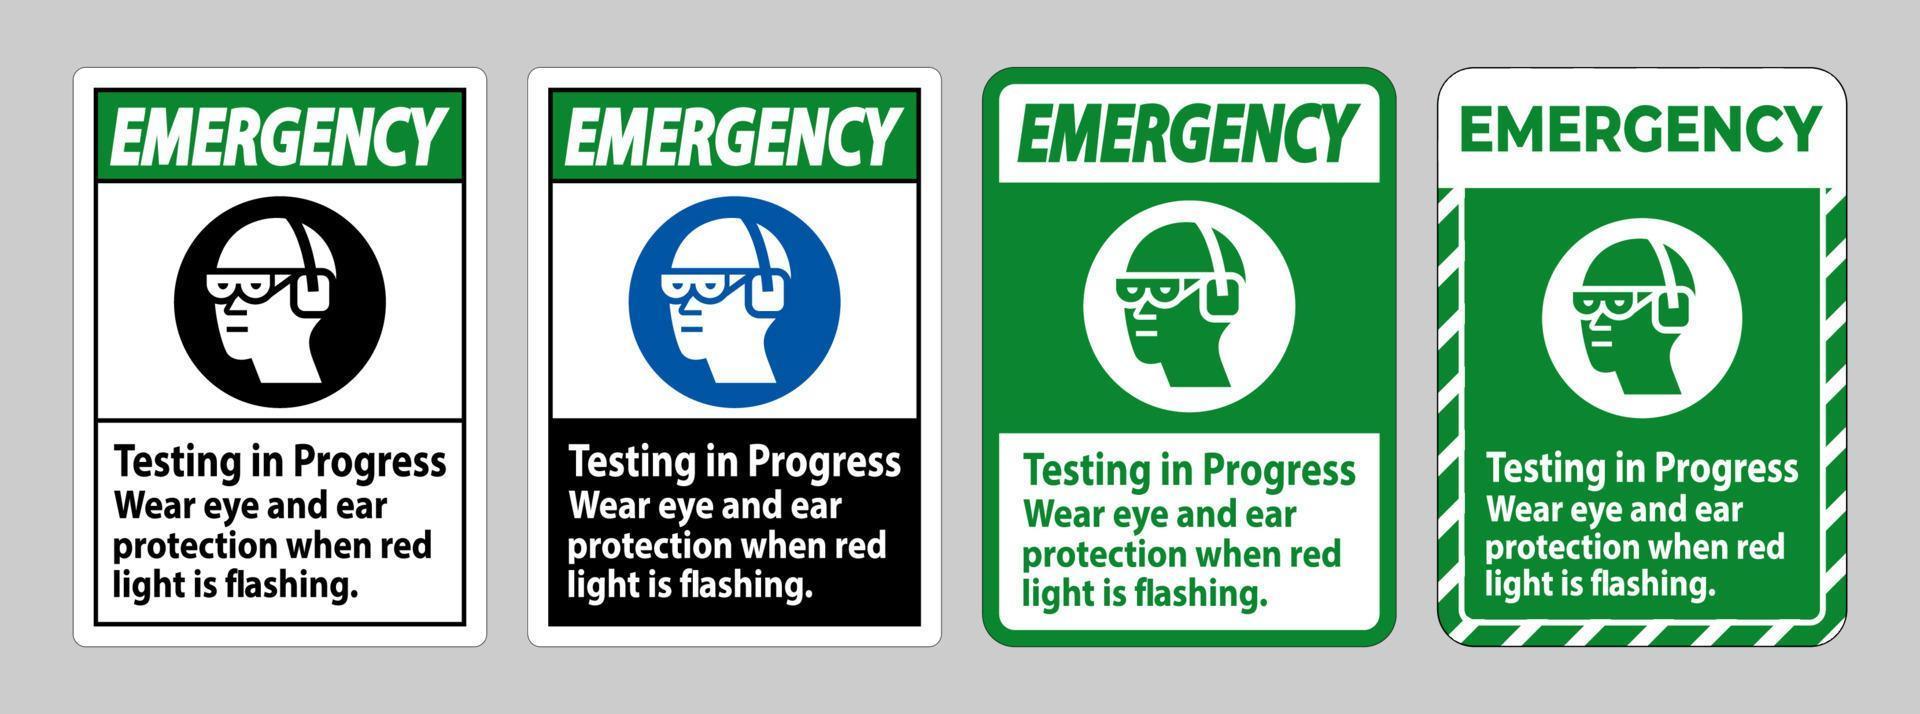 Emergency Sign Testing In Progress, Wear Eye And Ear Protection When Red Light Is Flashing vector